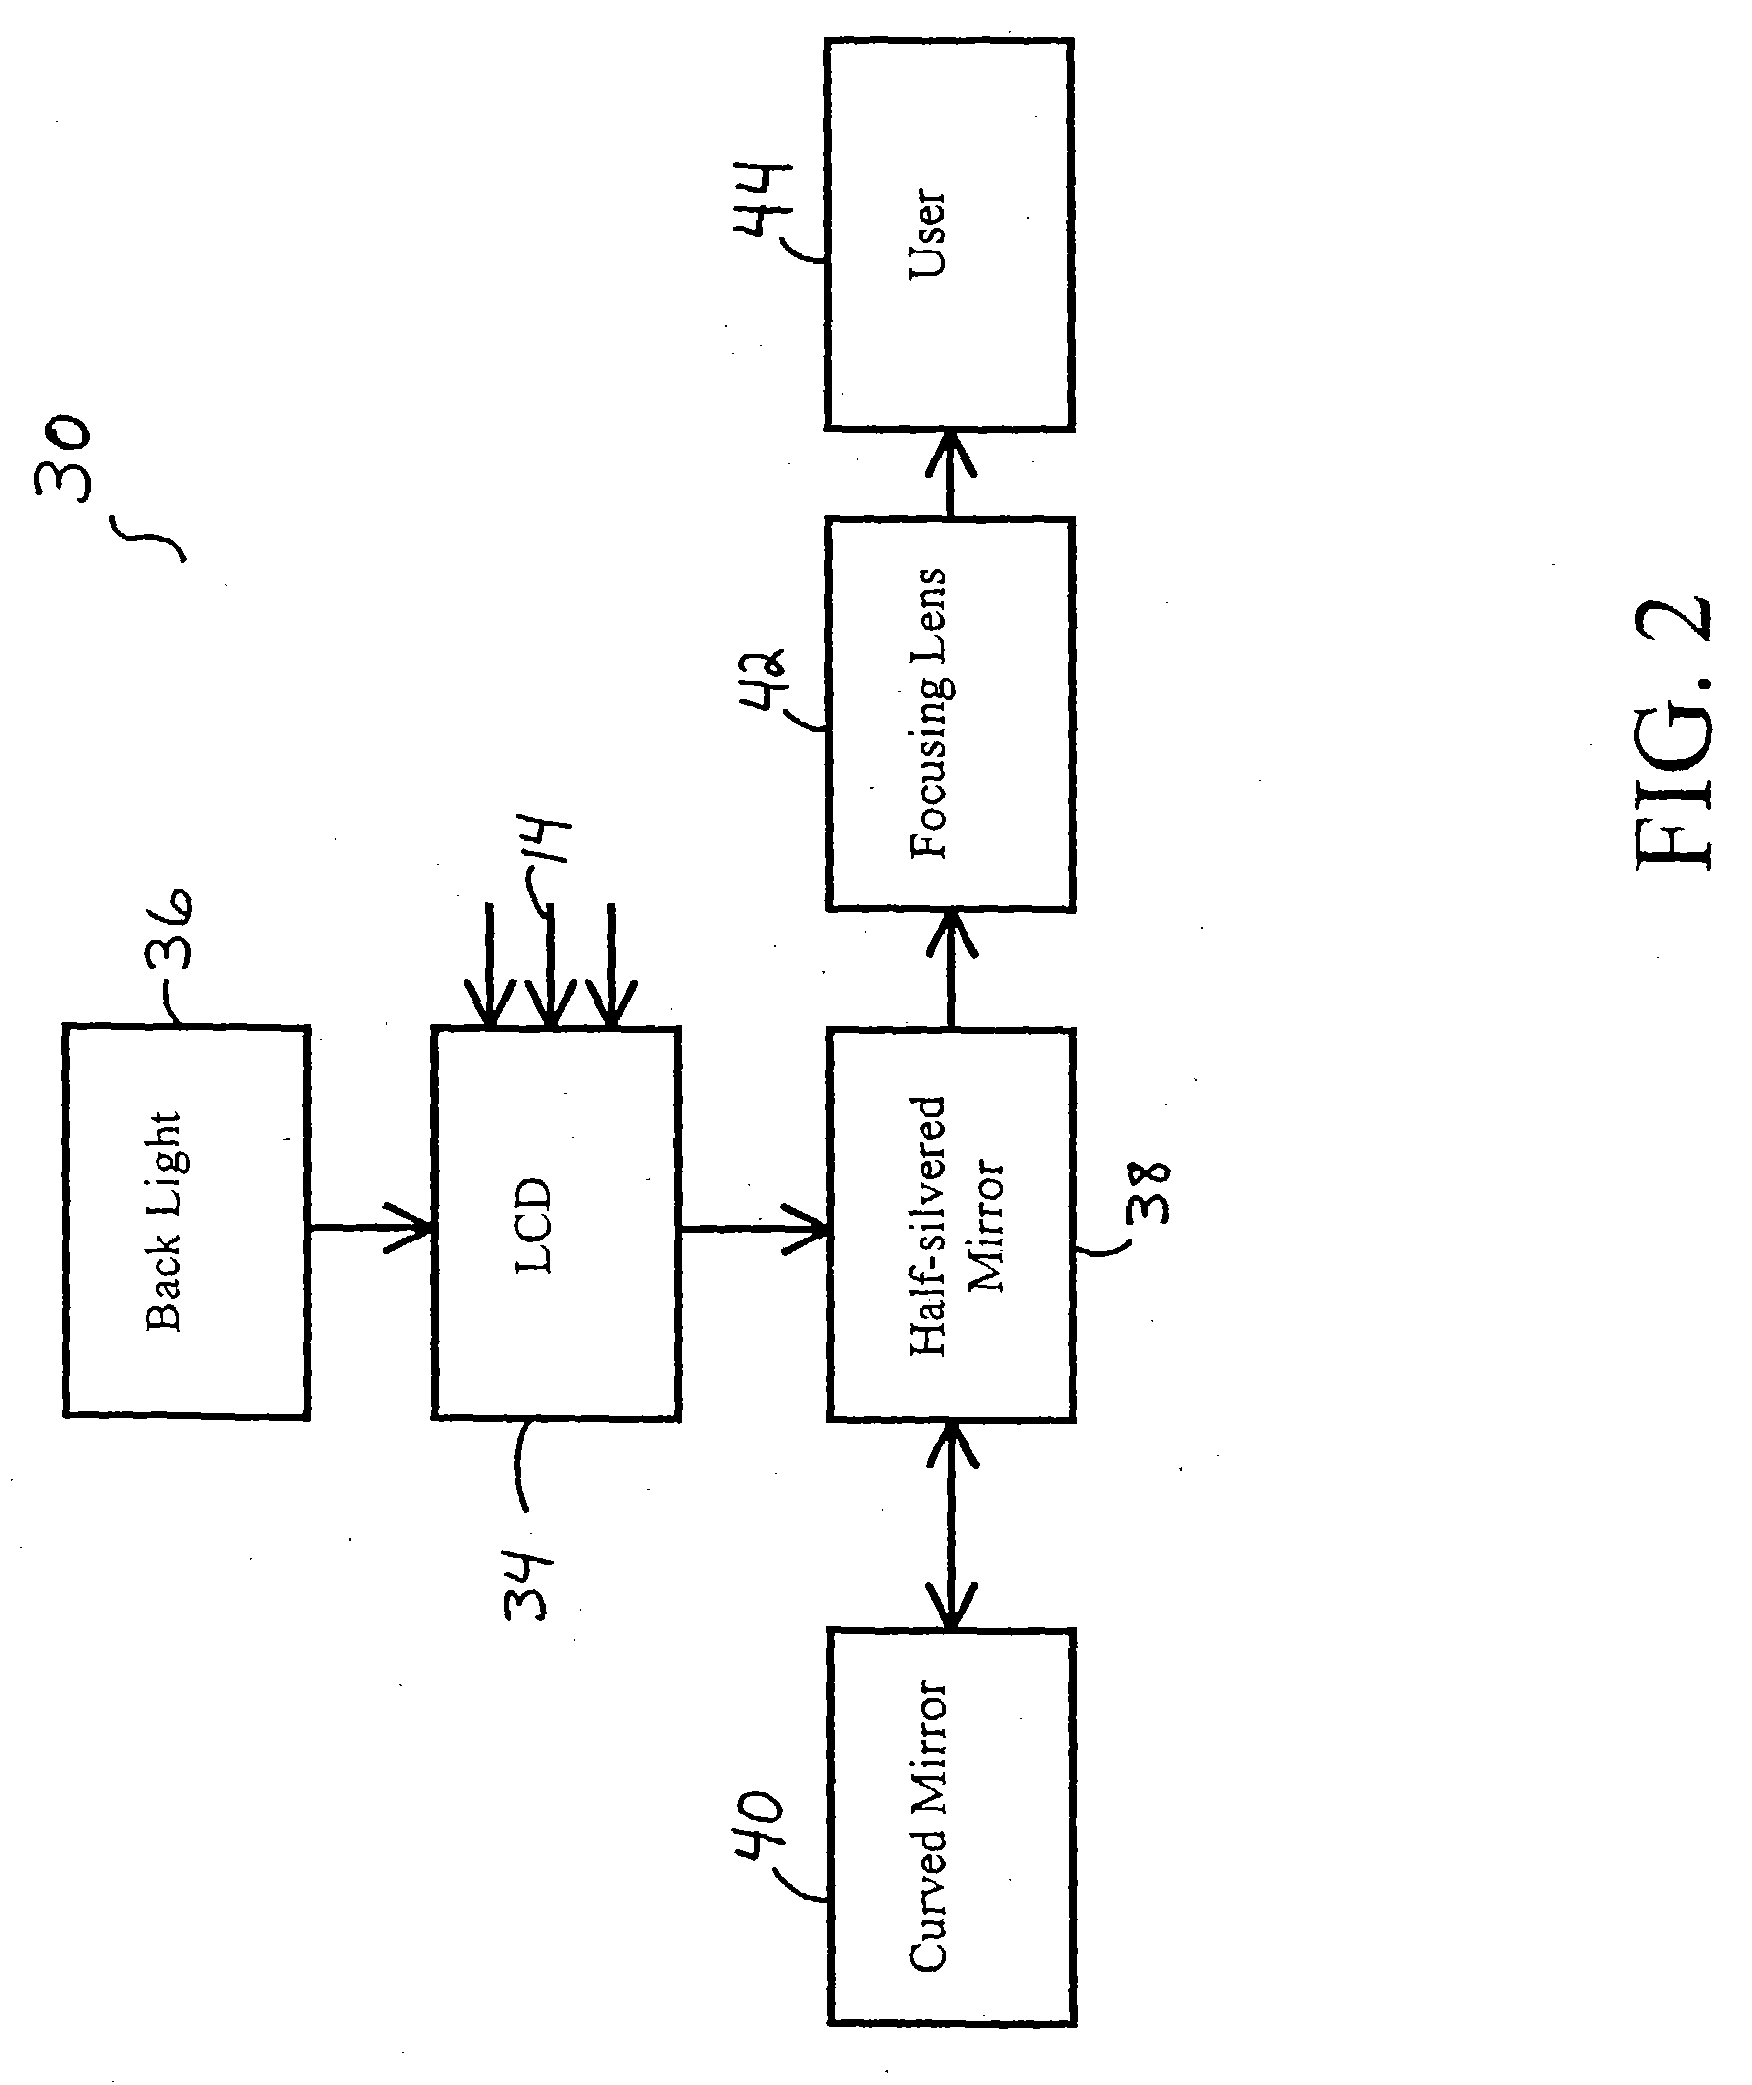 Electronic handheld audio/video receiver and listening/viewing device